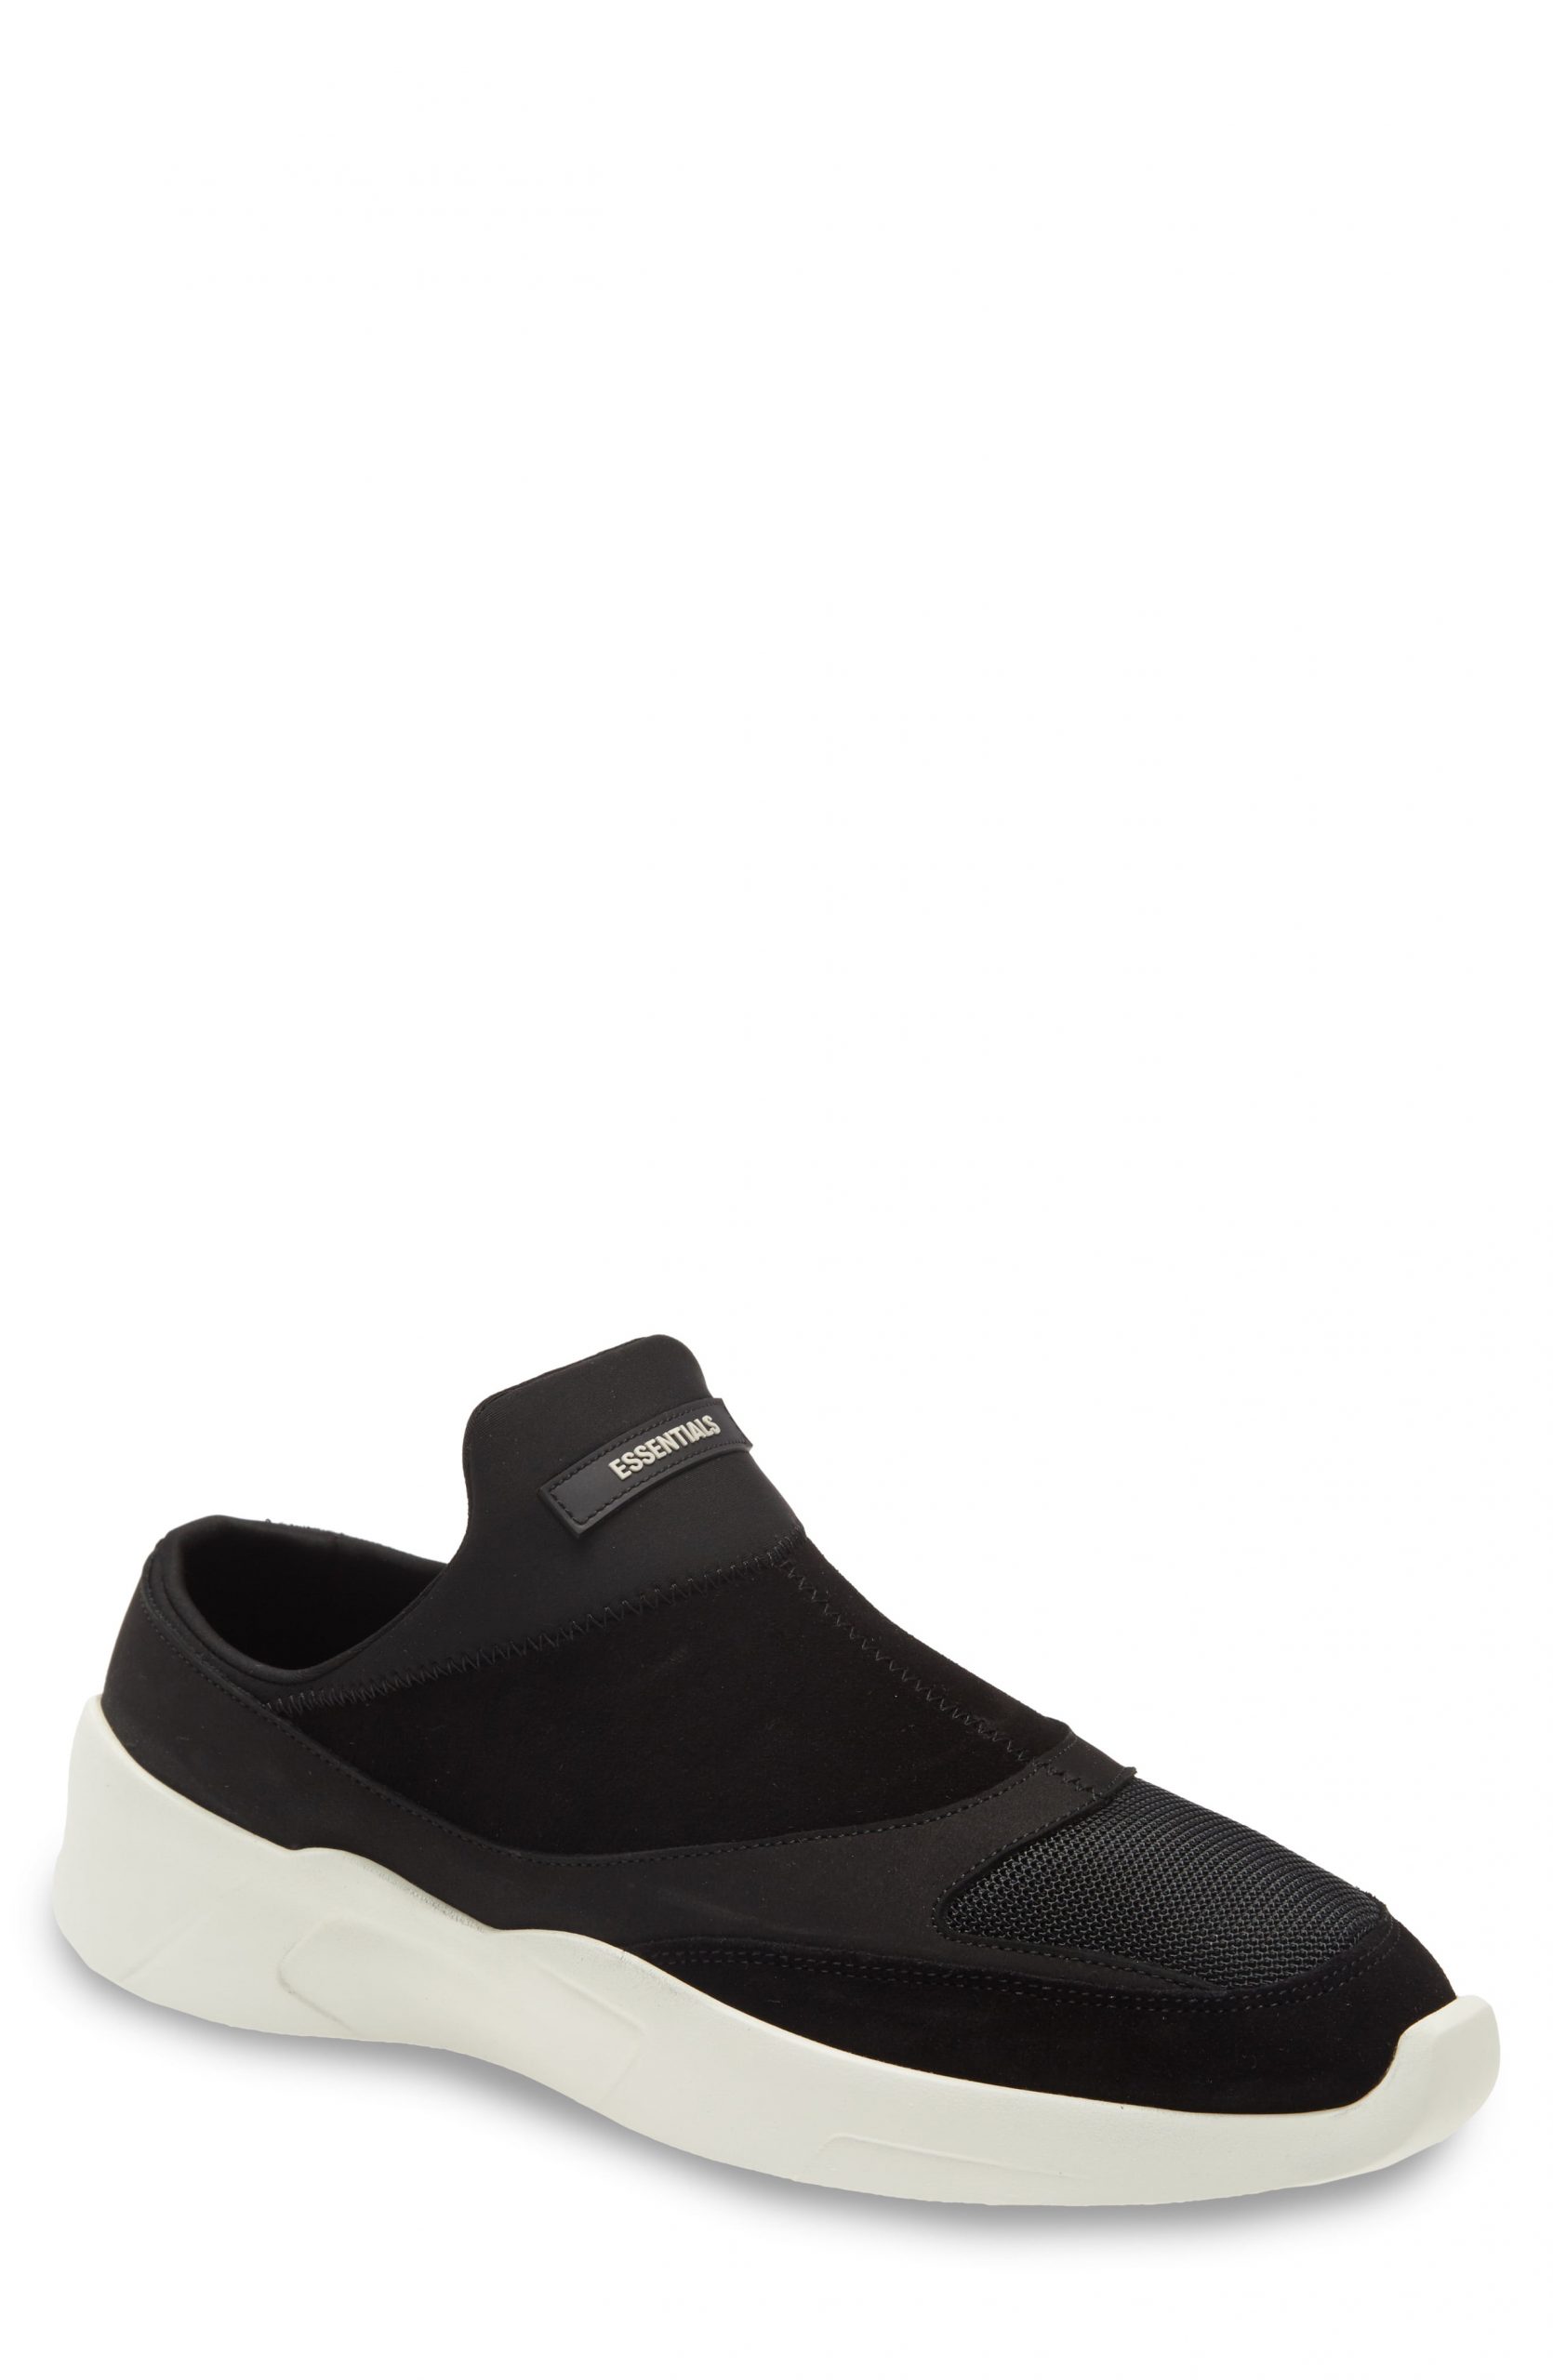 fear of god black backless sneakers